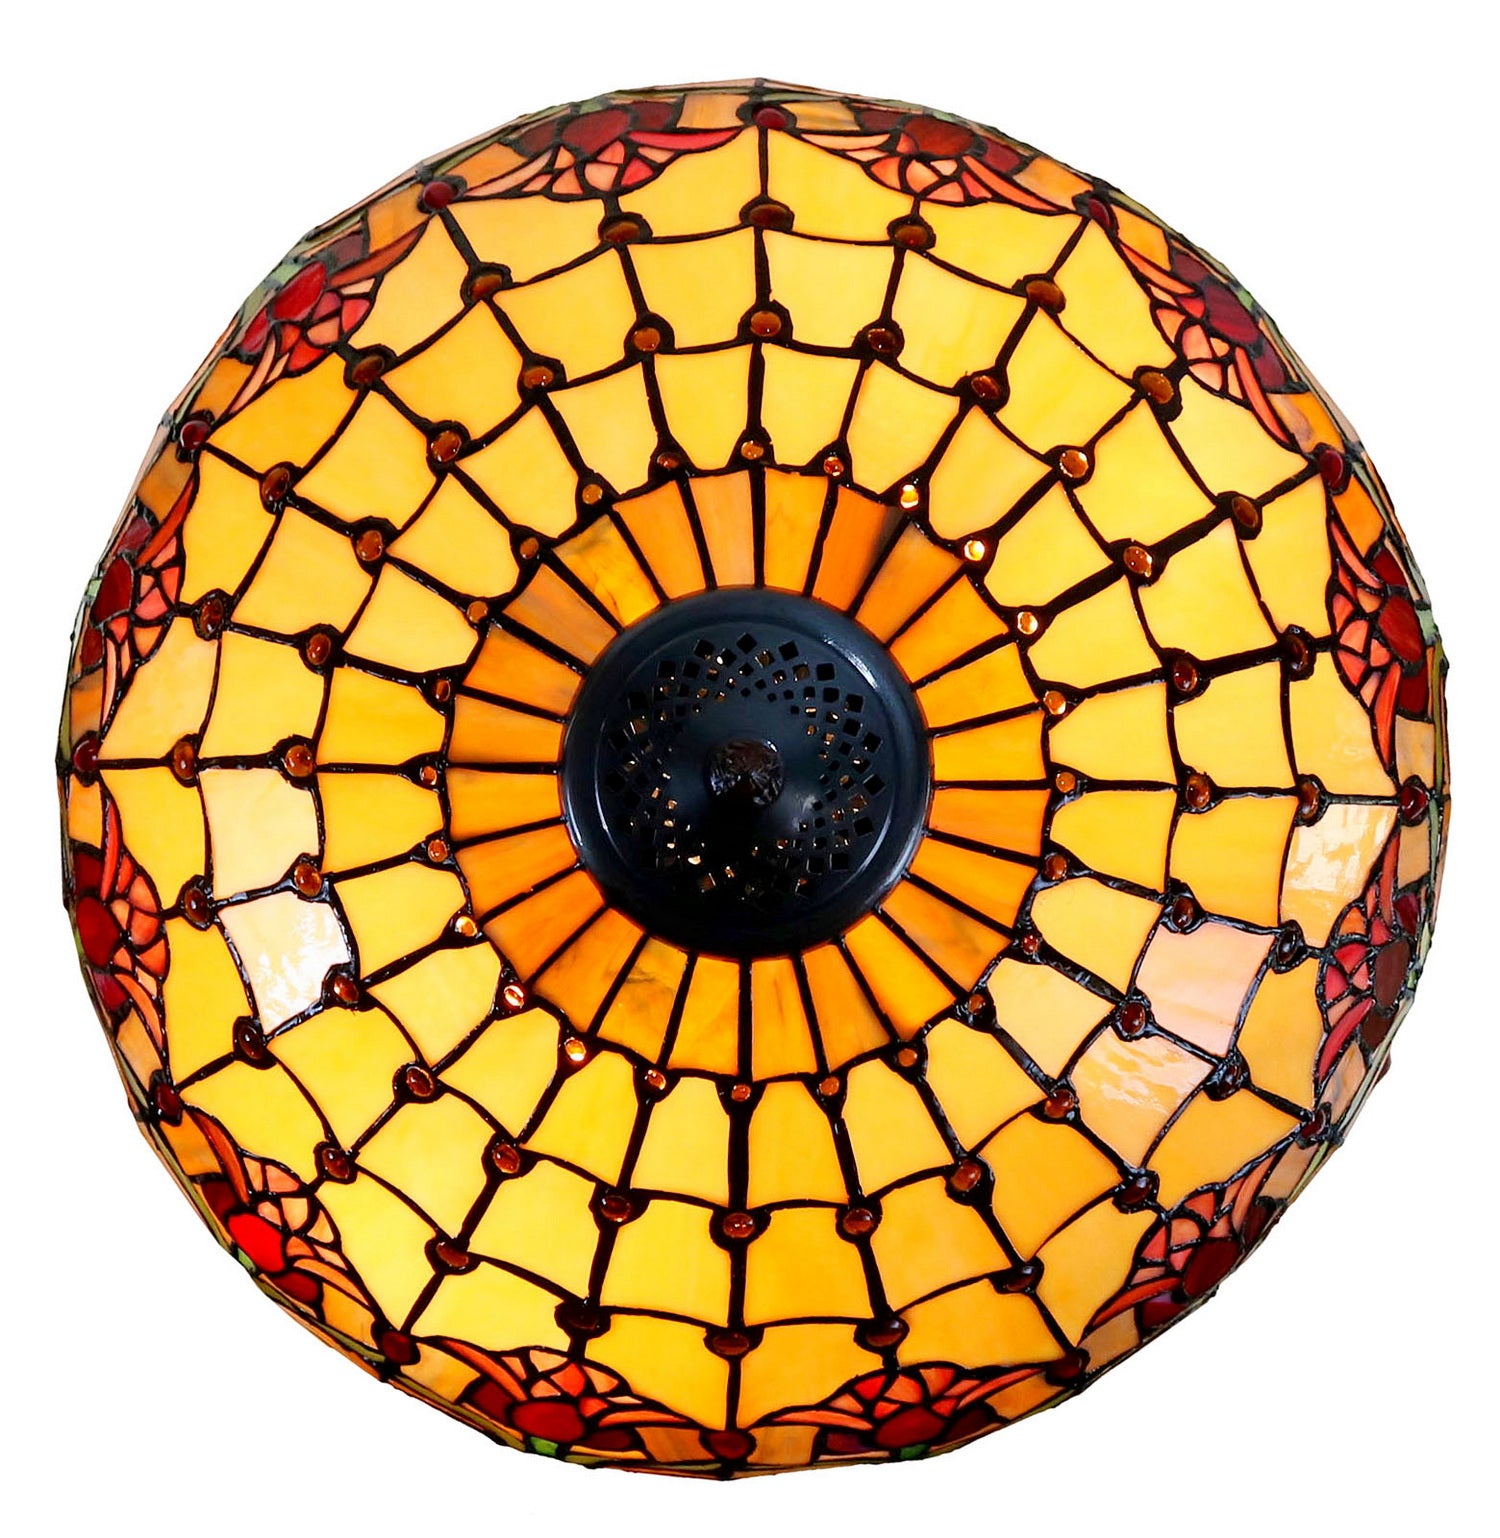 17" Red Colonial  Tulip Stained Glass Tiffany Pendant Light